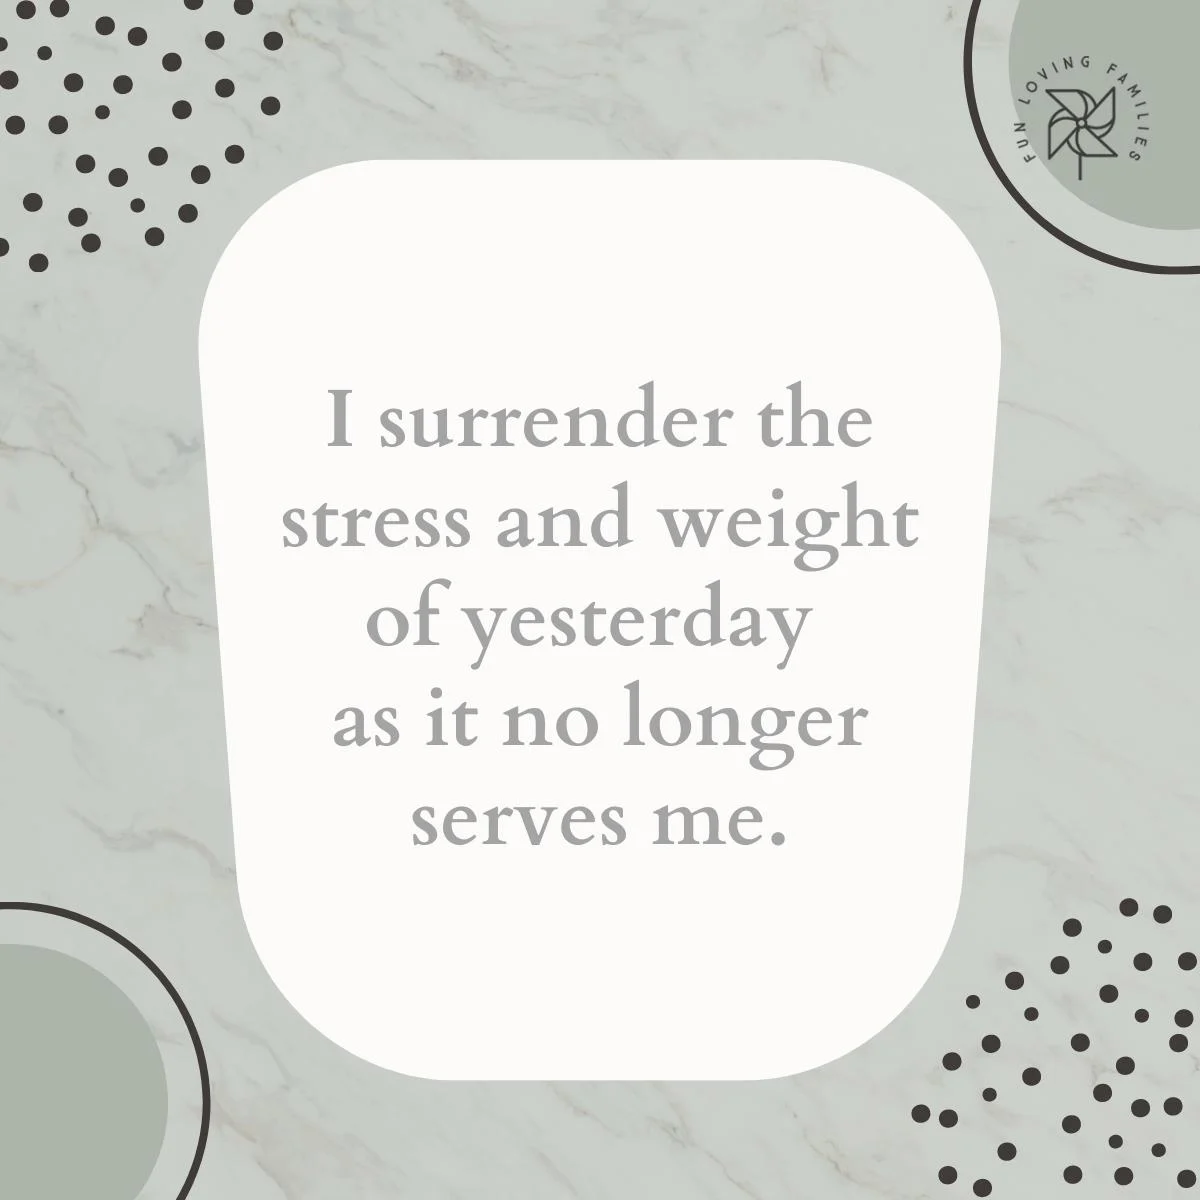 I surrender the stress and weight of yesterday as it no longer serves me affirmation